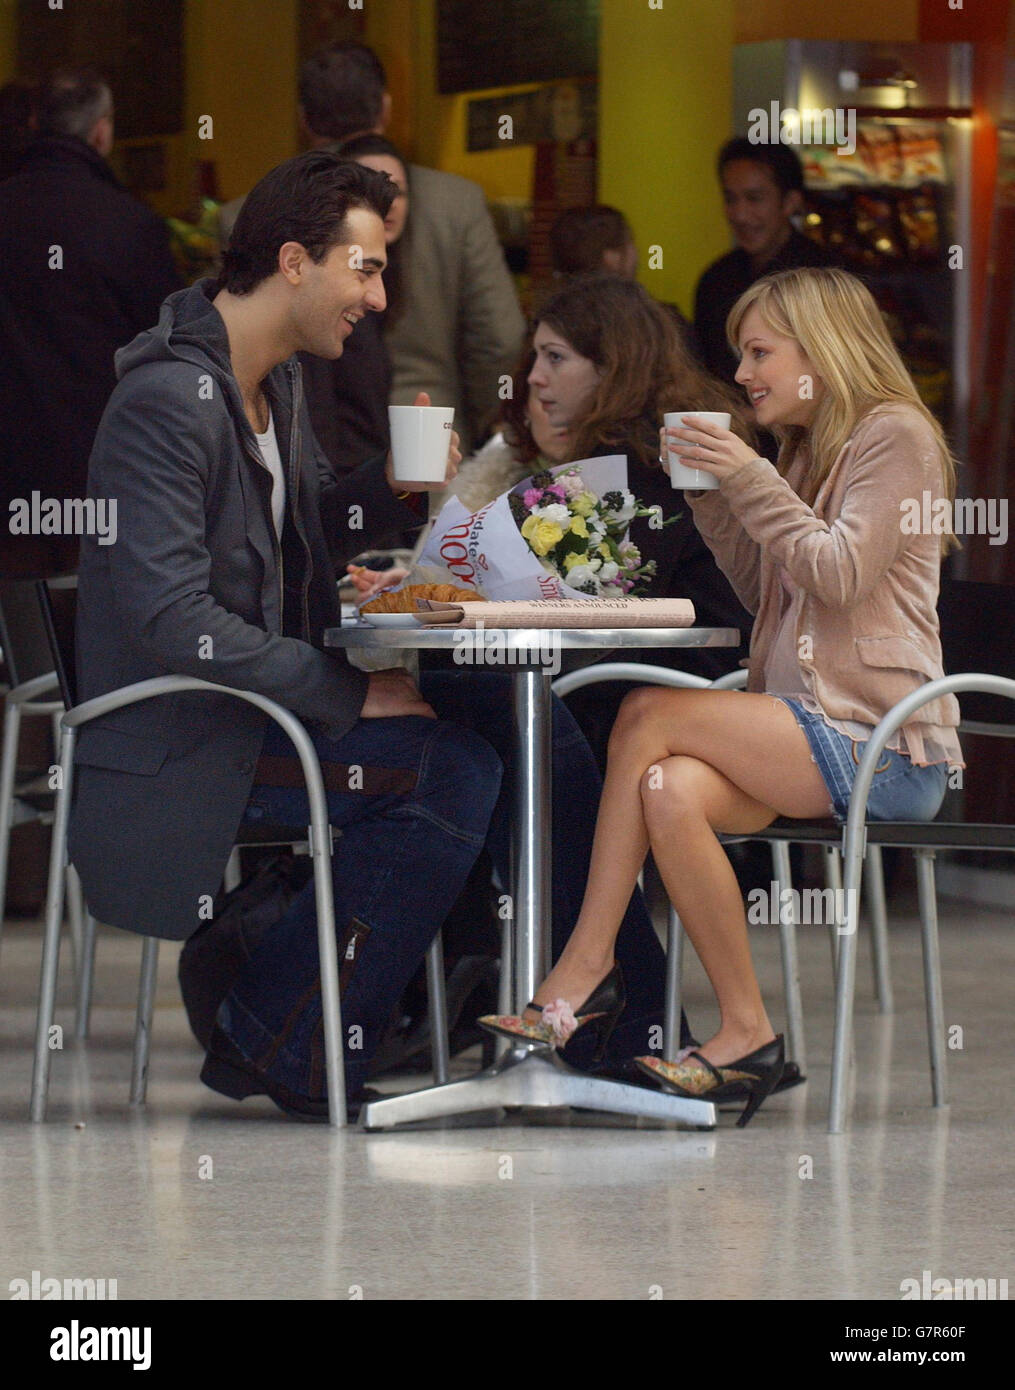 Singer Darius Danesh and Coronation Street actress Tina O'Brien meet for a coffee at Waterloo Station, after learning they have been awarded honours by 1.5 million singles with on-line dating company Udate.co.uk. Tina, who plays the character Sarah Louise Platt, was voted 'Nation's Sweetheart' and former Pop Idol finalist Darius received the honour of 'Tempter'. Stock Photo